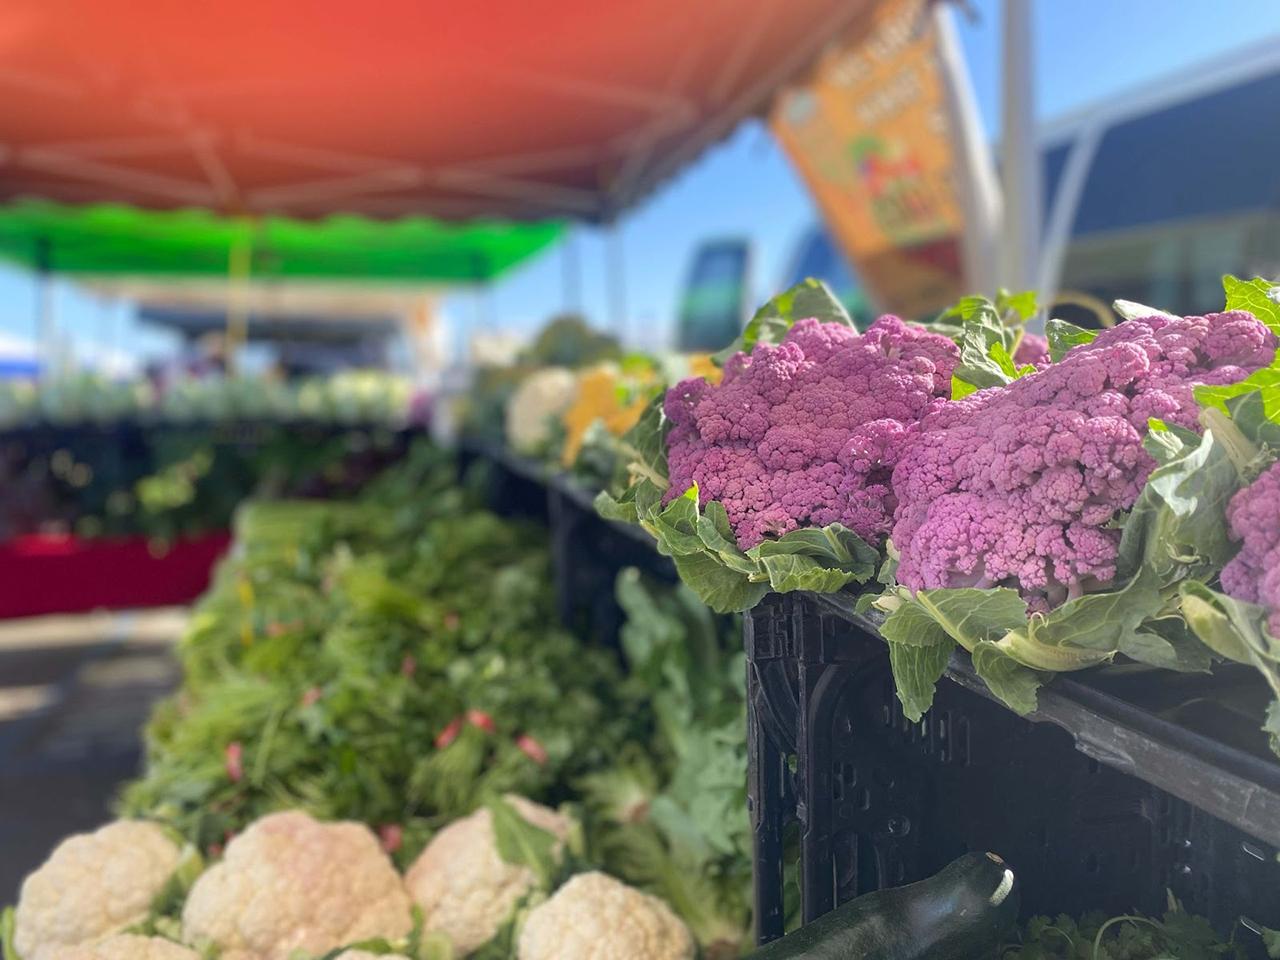 Fresh Finds & Community Vibes: Get Ready for the River Islands Farmers Market!